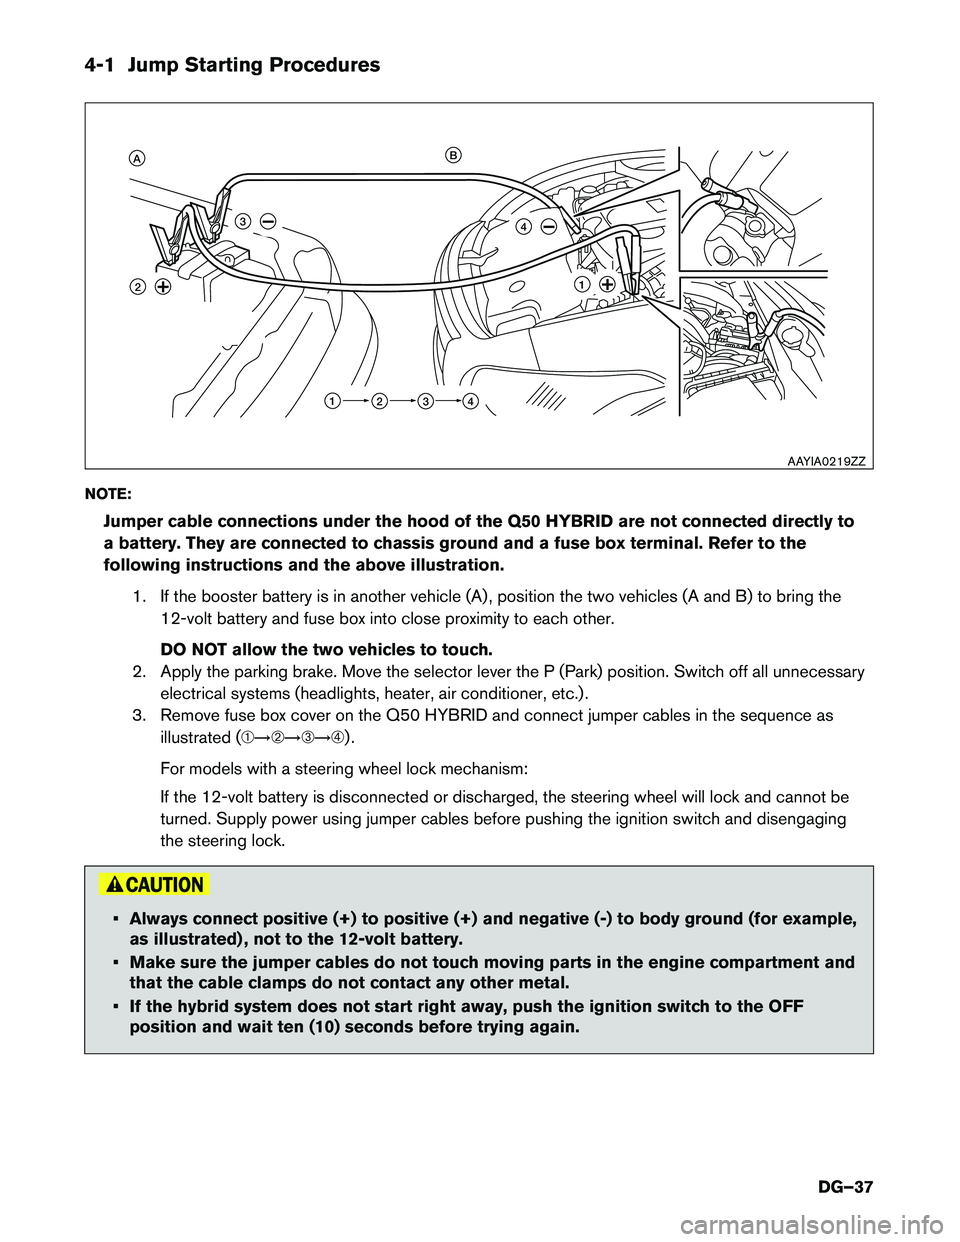 INFINITI Q50 HYBRID 2015  Dismantling Guide 4-1 Jump Starting Procedures 
NOTE:Jumper cable connections under the hood of the Q50 HYBRID are not connected directly to 
a battery. They are connected to chassis ground and a fuse box terminal. Ref